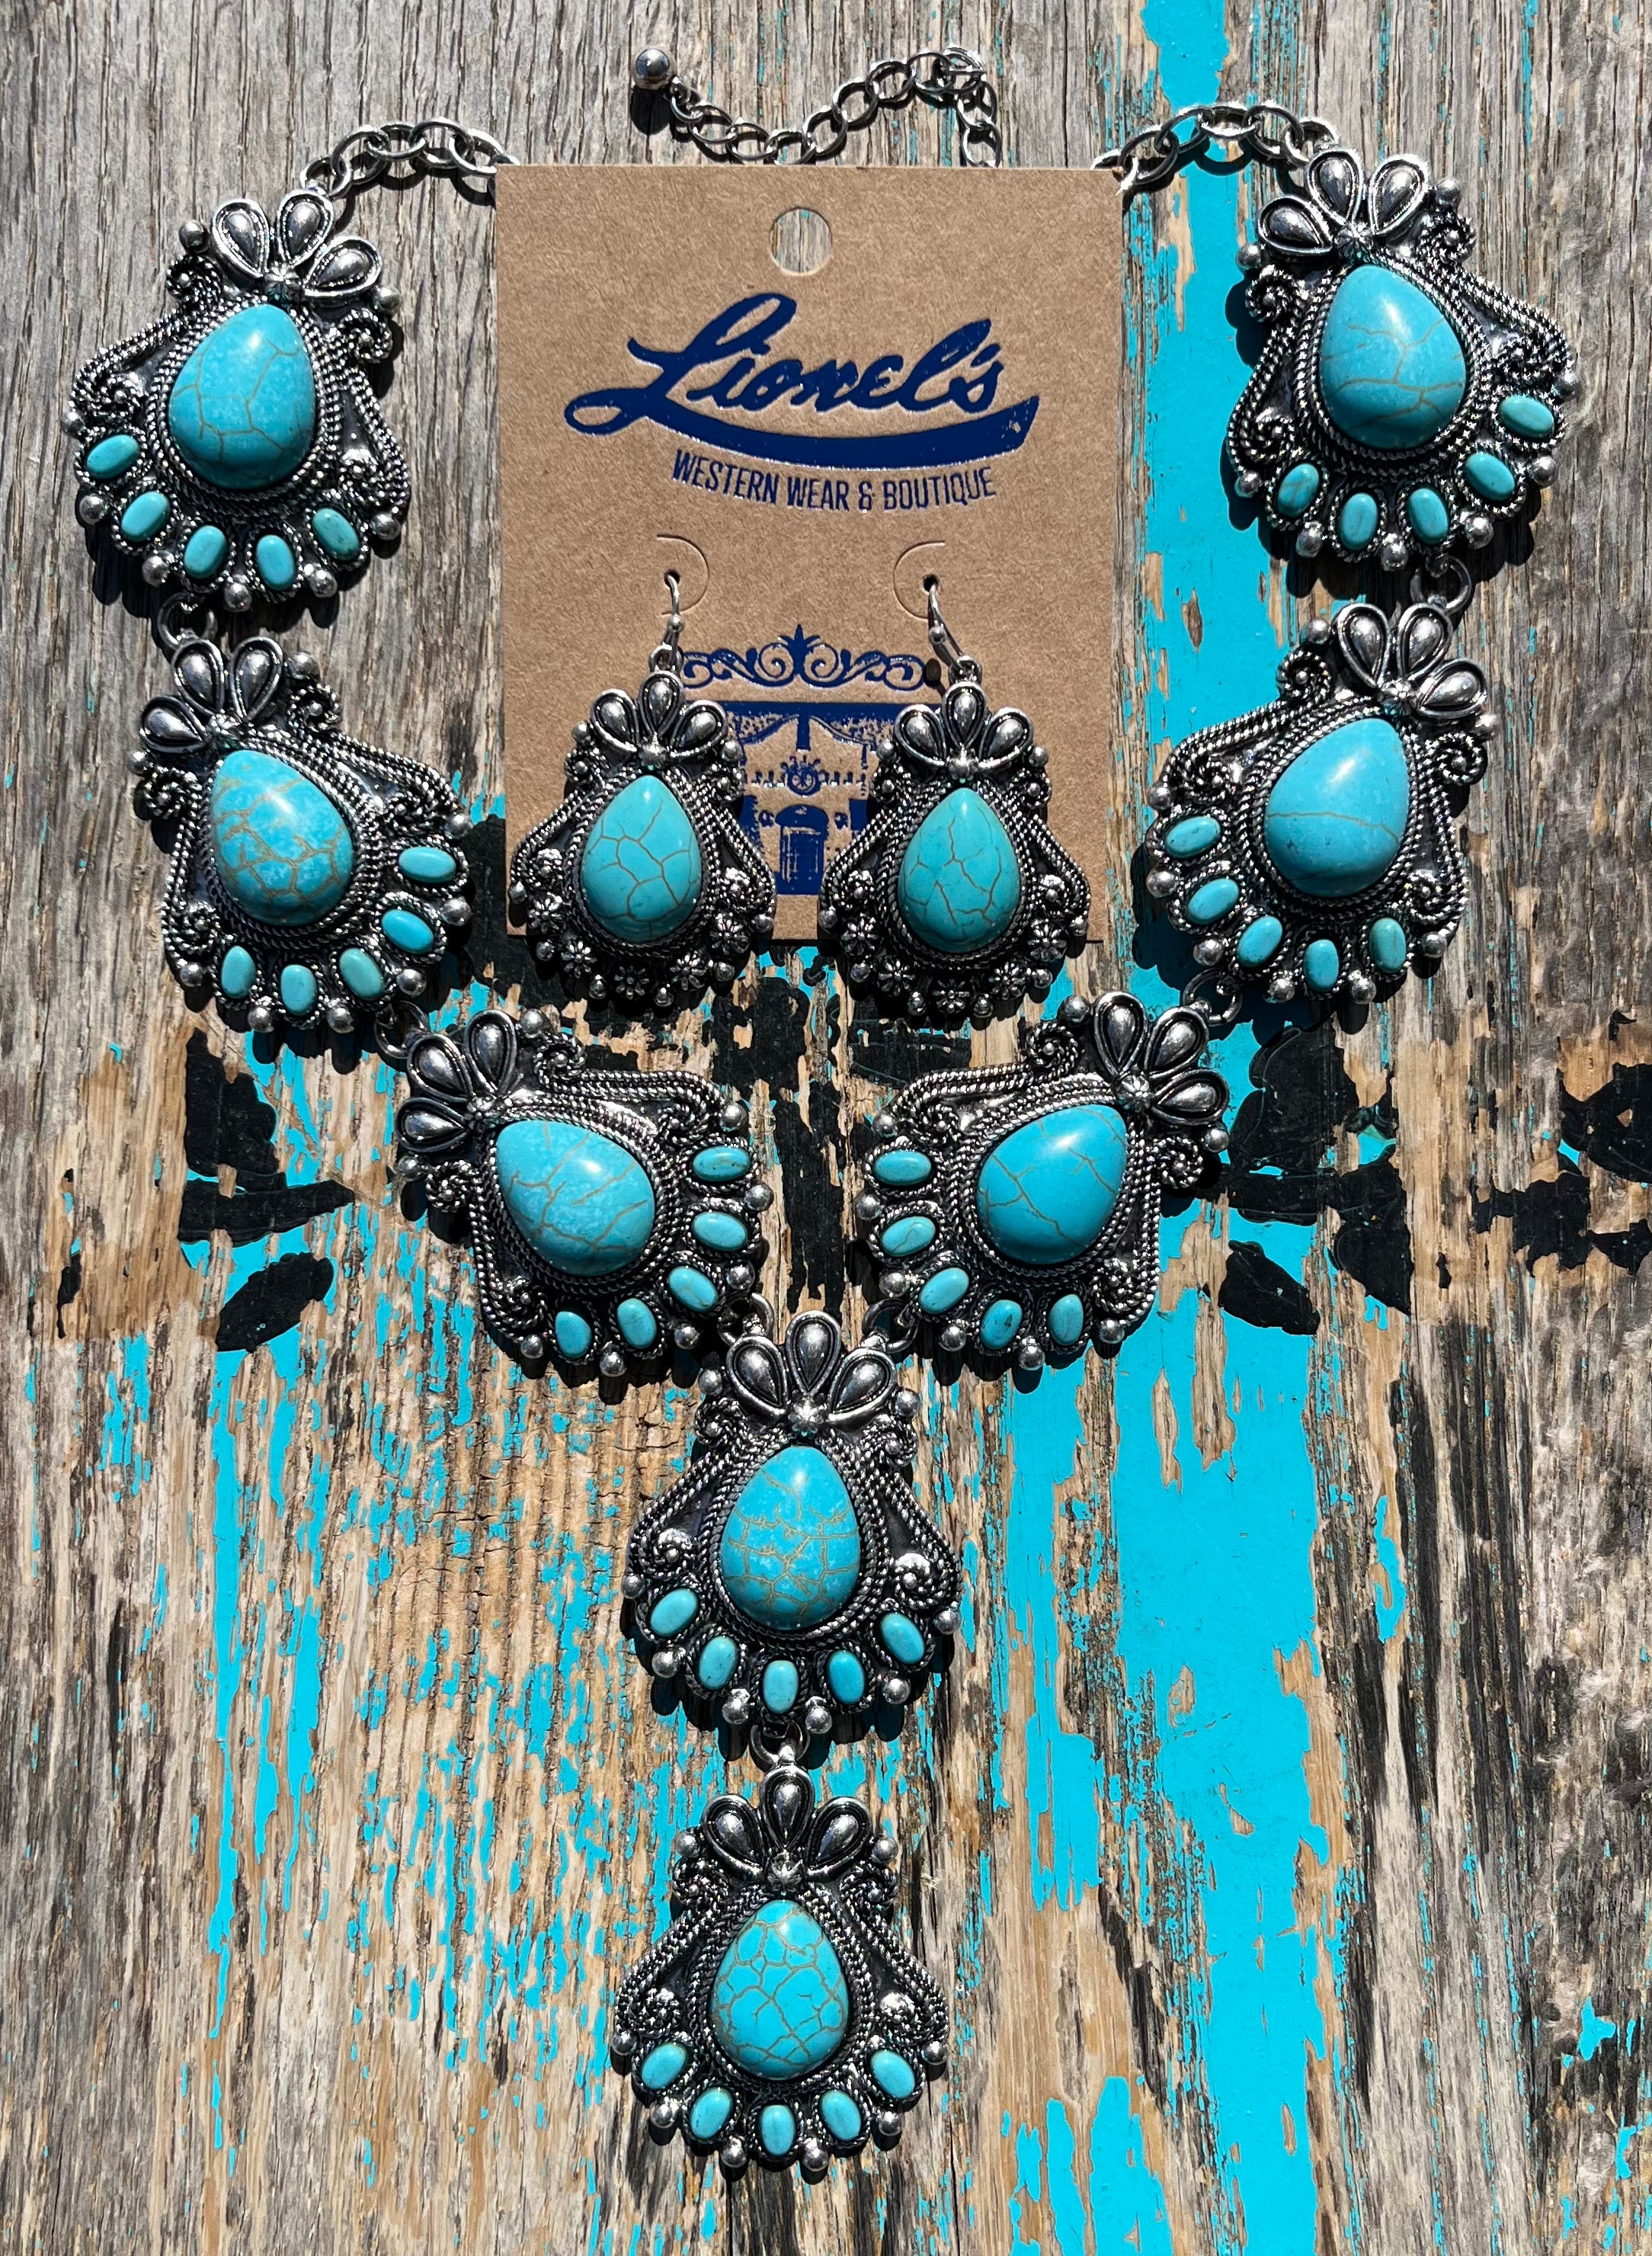 Turquoise Filigree Squash Blossom Necklace w/ Earrings